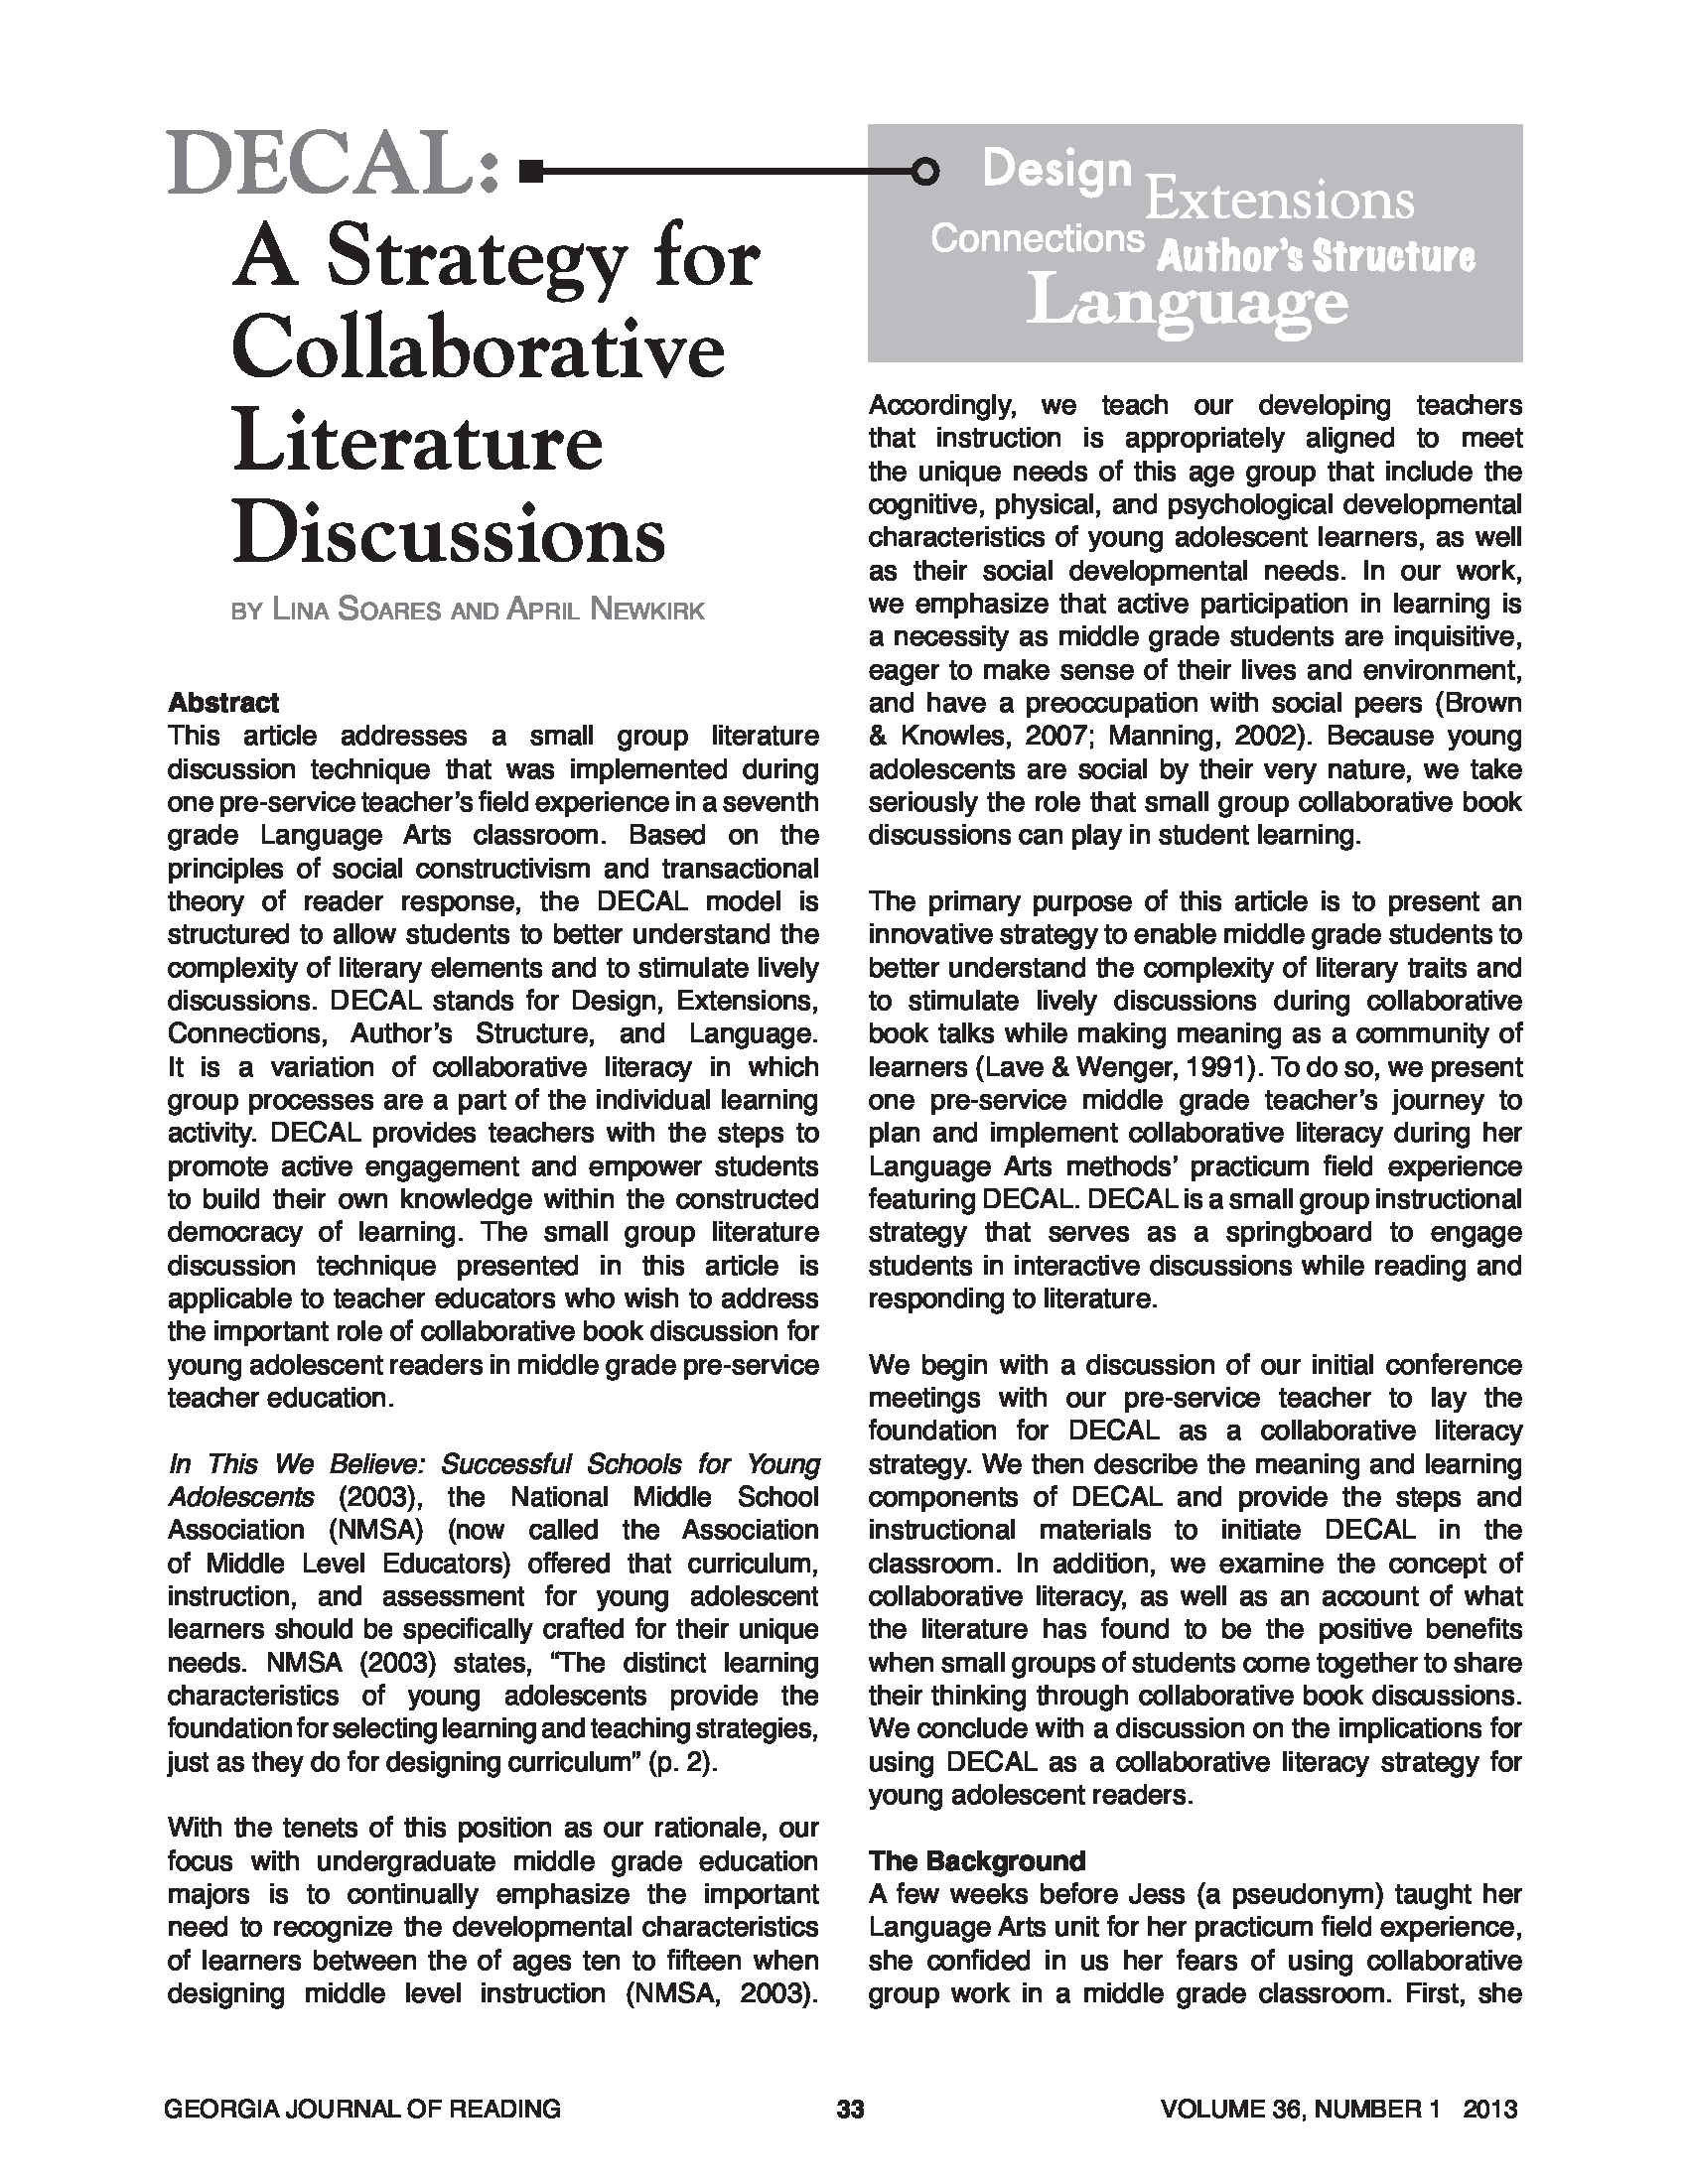 ECAL A Strategy for Collaborative Literature Discussions